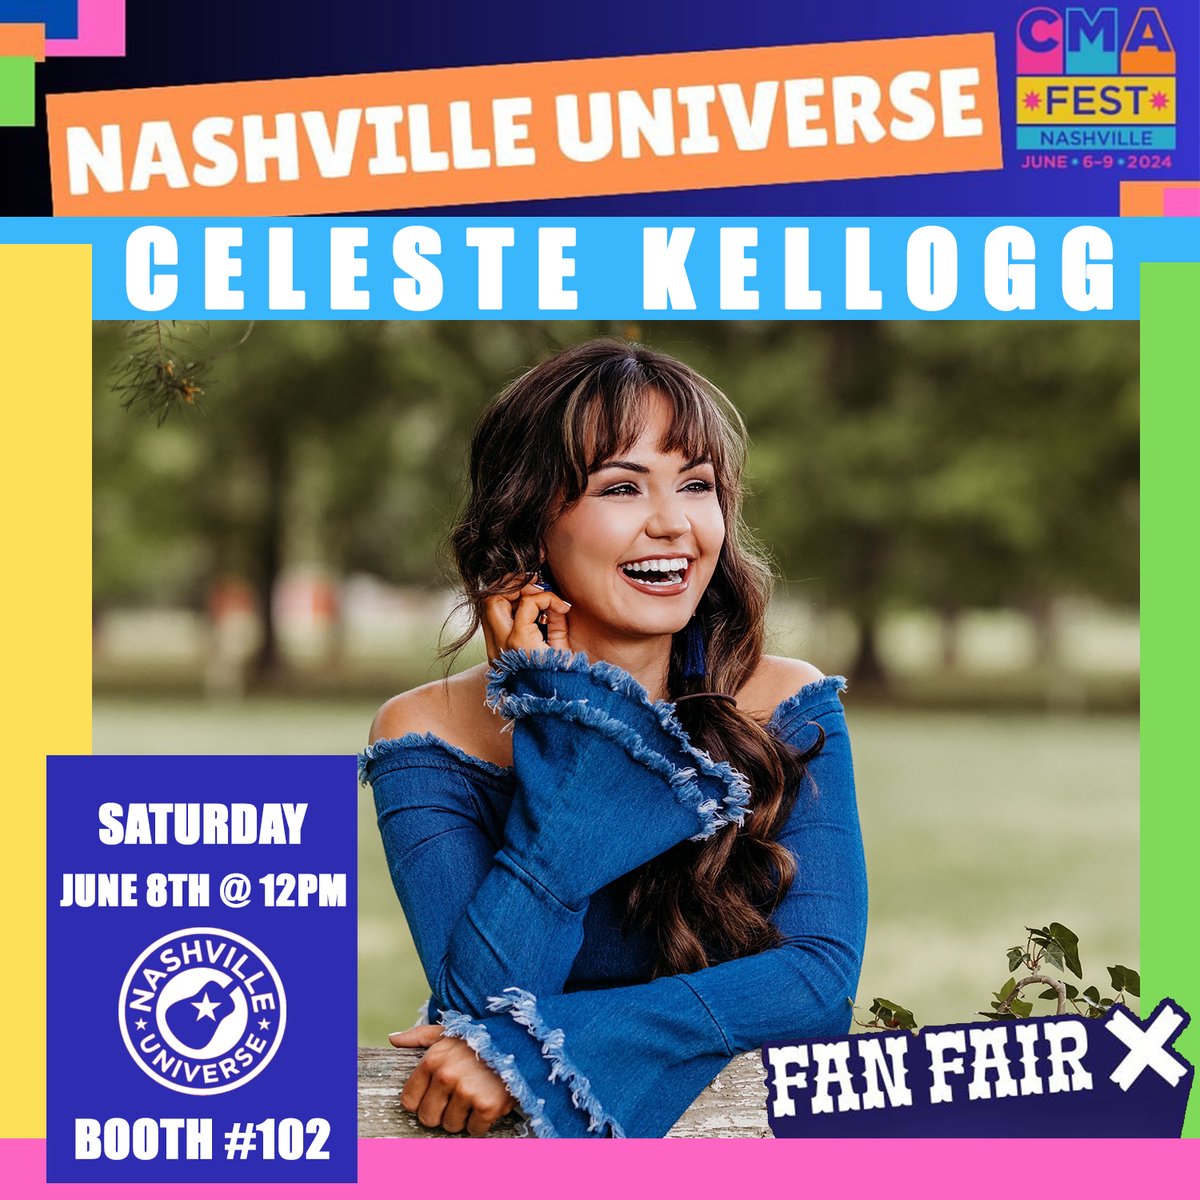 JUST ANNOUNCED!!!! I'll be signing at the @NashvilleUnivrs booth Saturday, June 8th at noon!  Can't wait to see all my country music friends! @CountryMusic #CMAFest #FanFairX